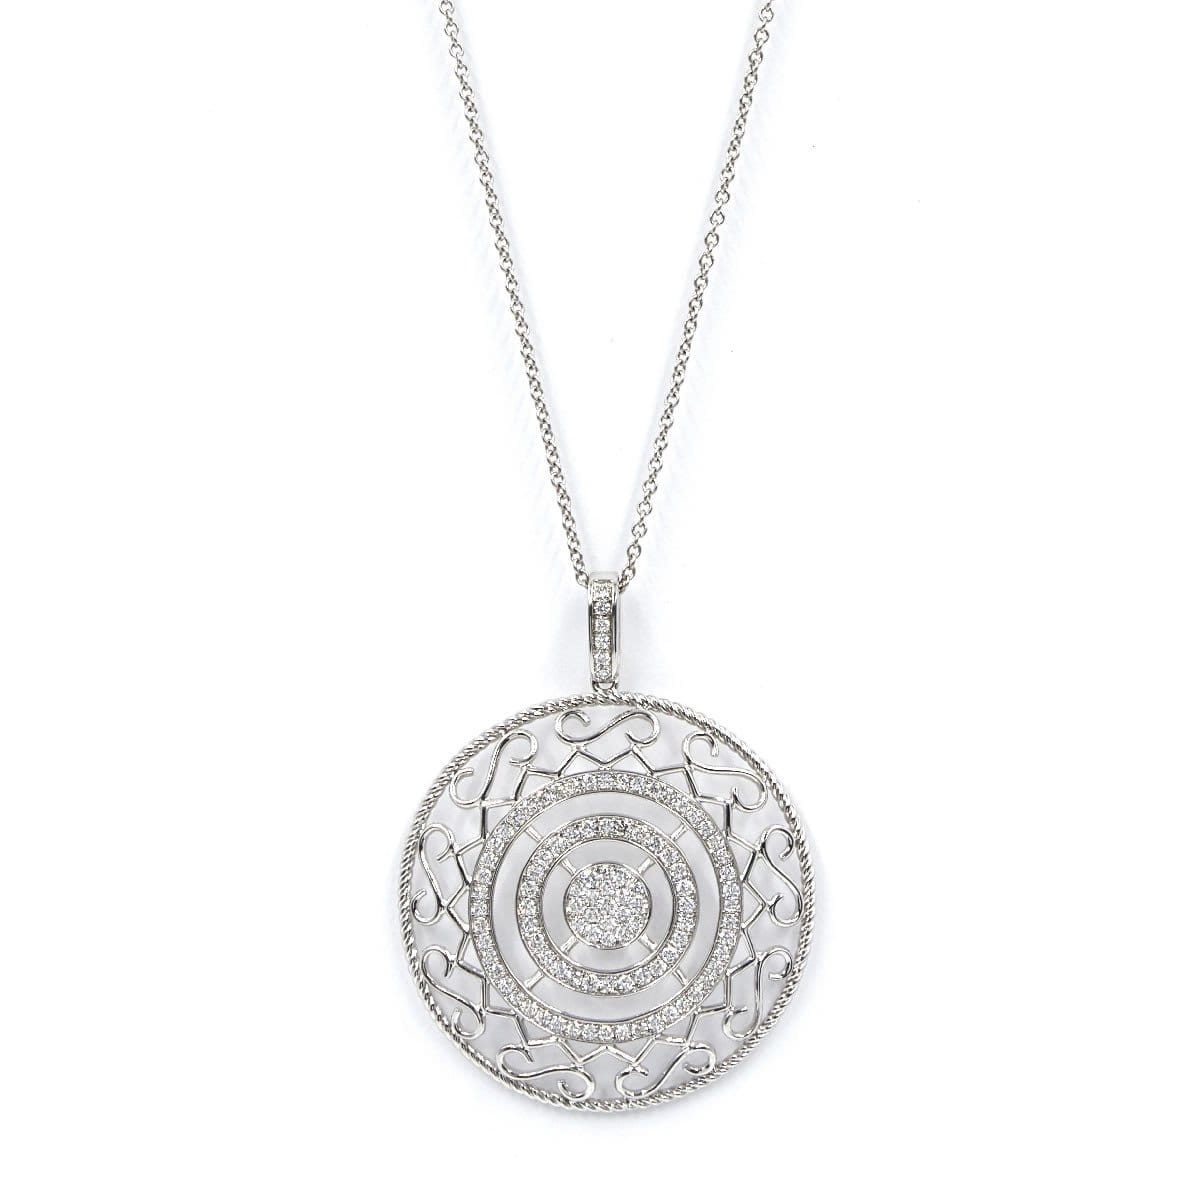 CIRCLE OF LOVE-DIAMOND NECKLACE - Chris Aire Fine Jewelry & Timepieces